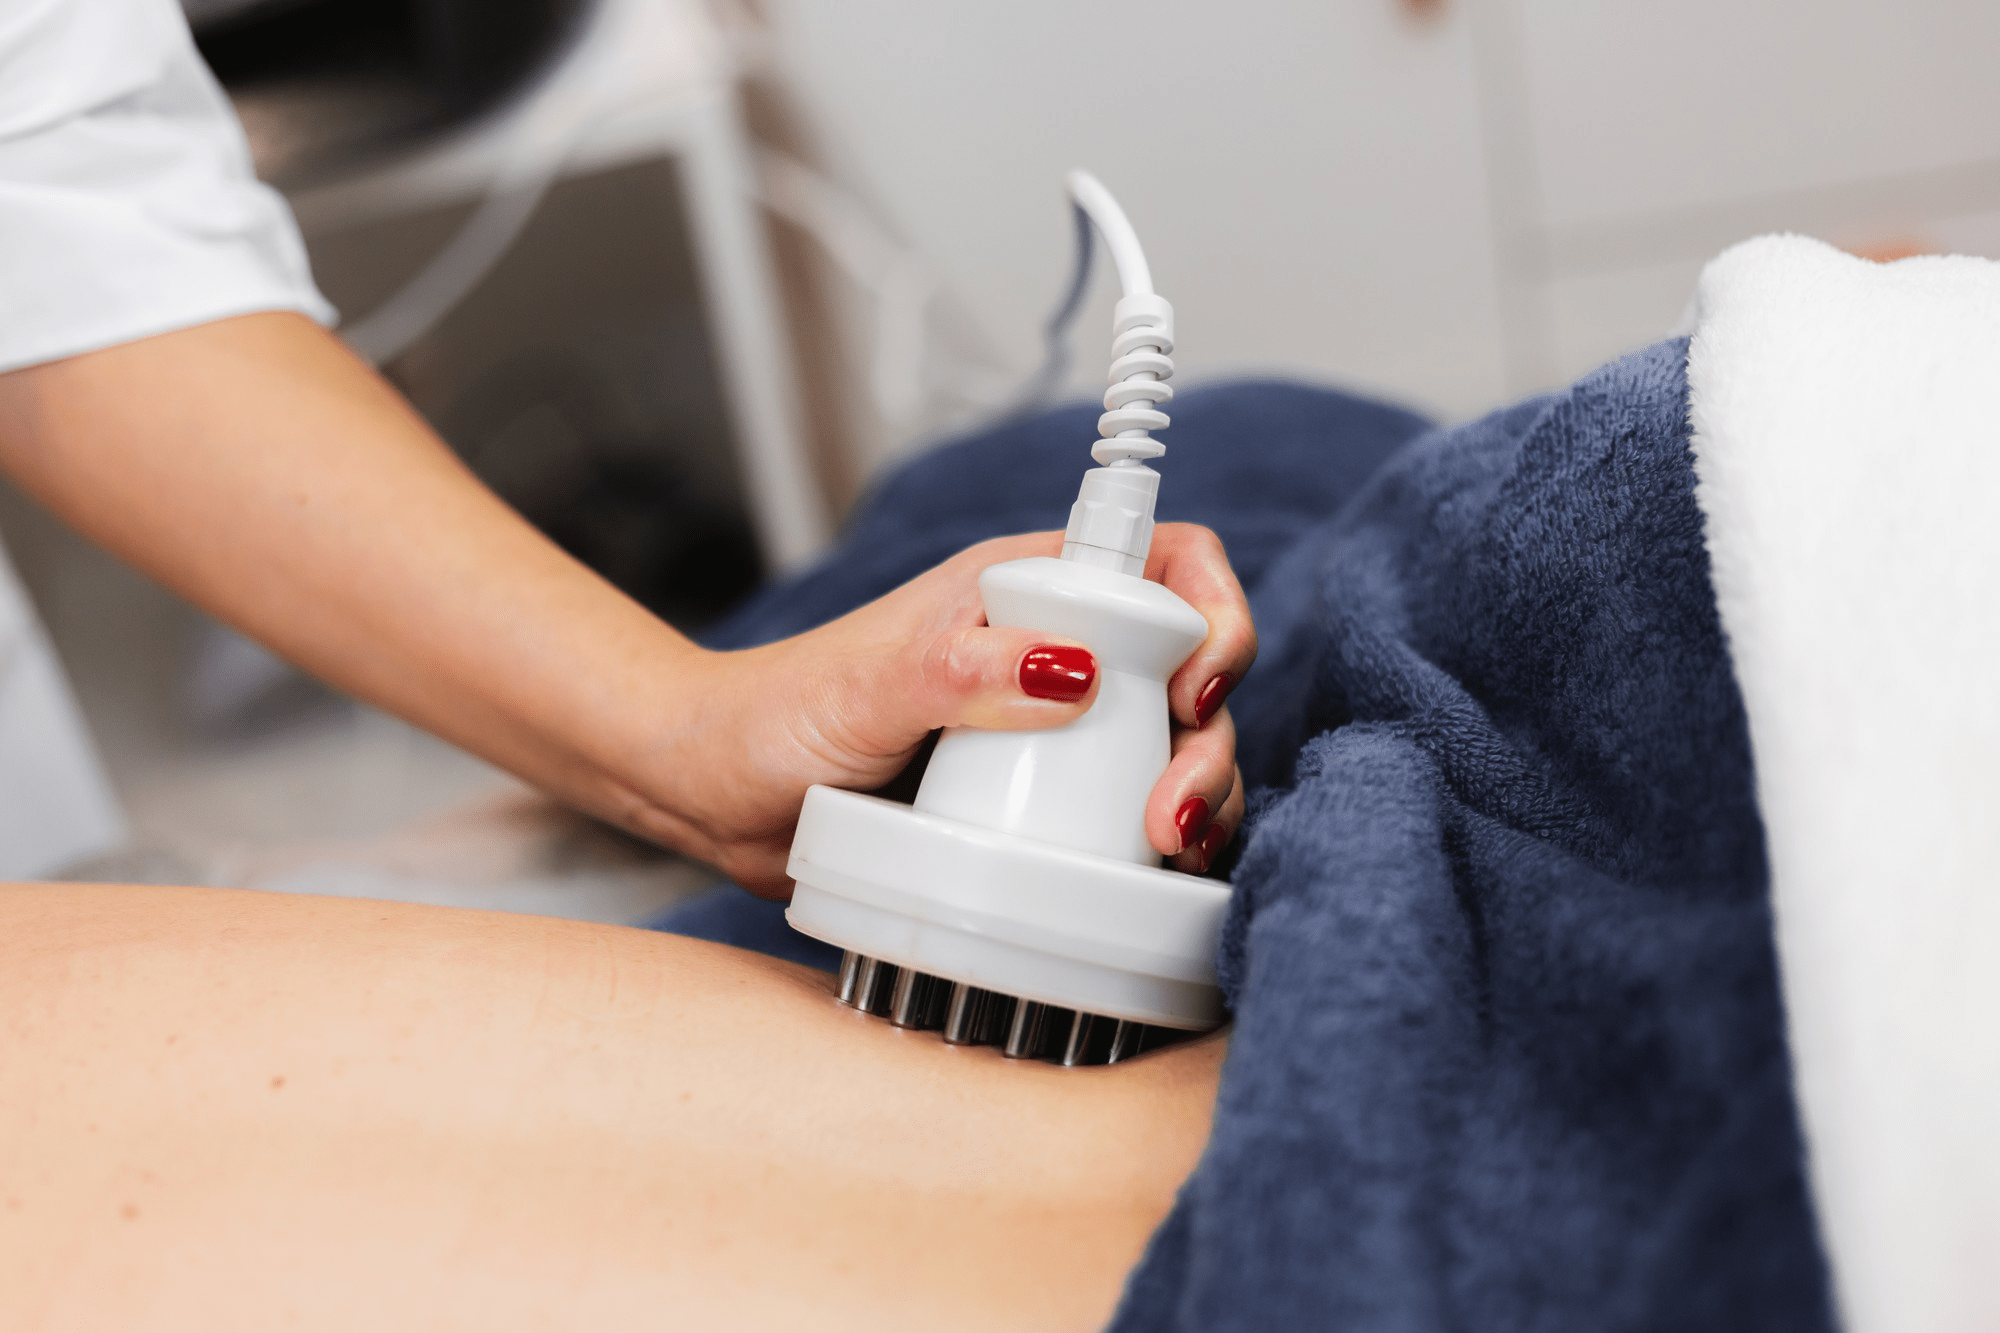 Shockwave Therapy treatment - Painmedic Pain Clinic